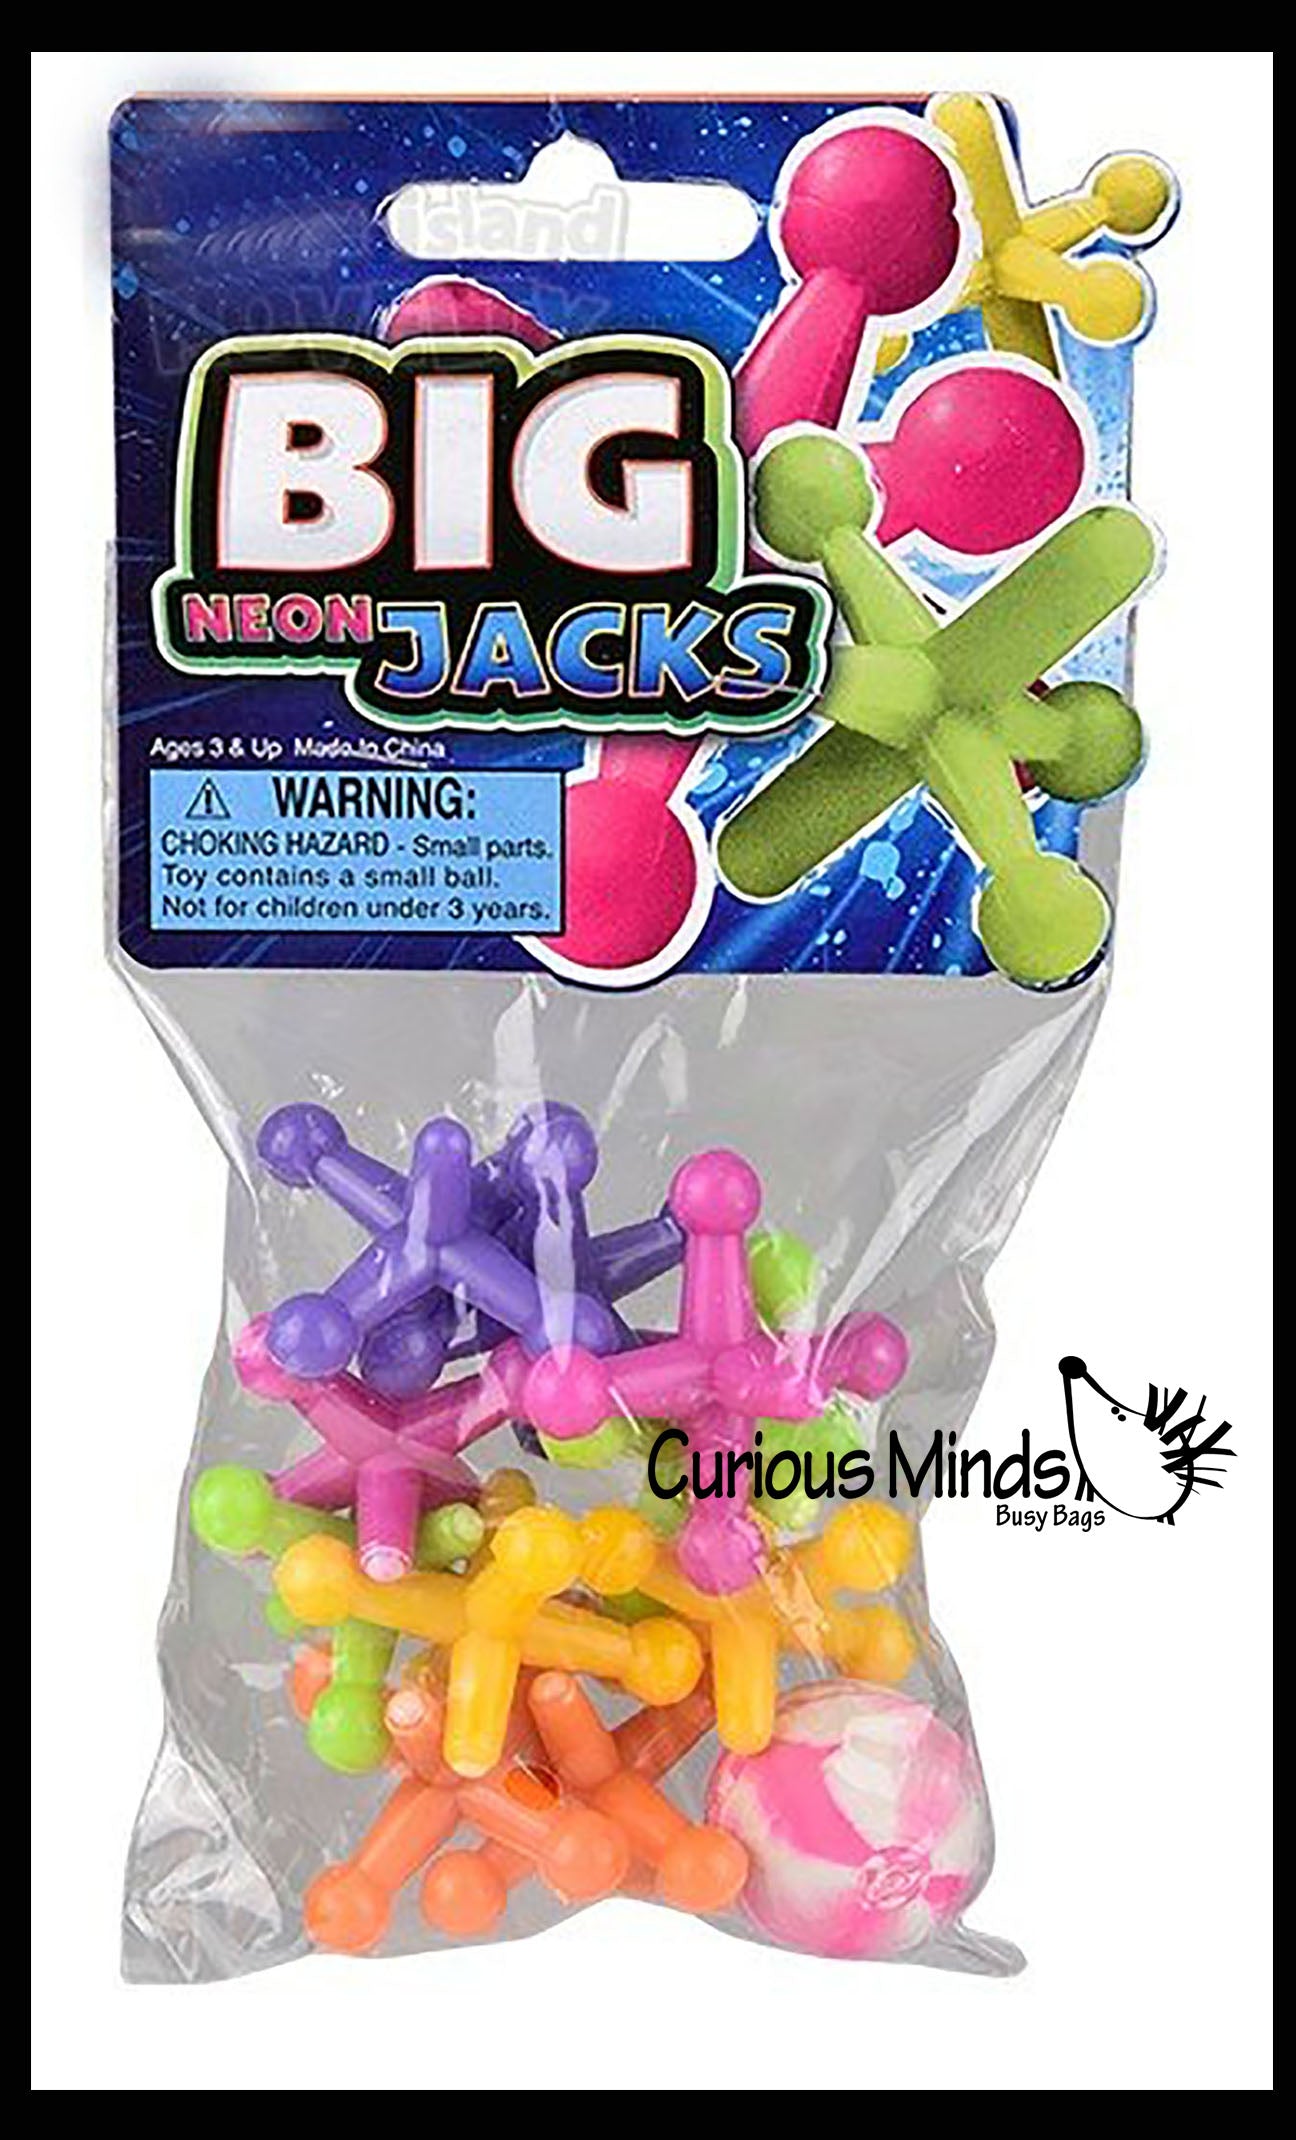 Large Neon Plastic Jacks Game Sets - Classic Game - Party Favors - Gift Bags - Prizes